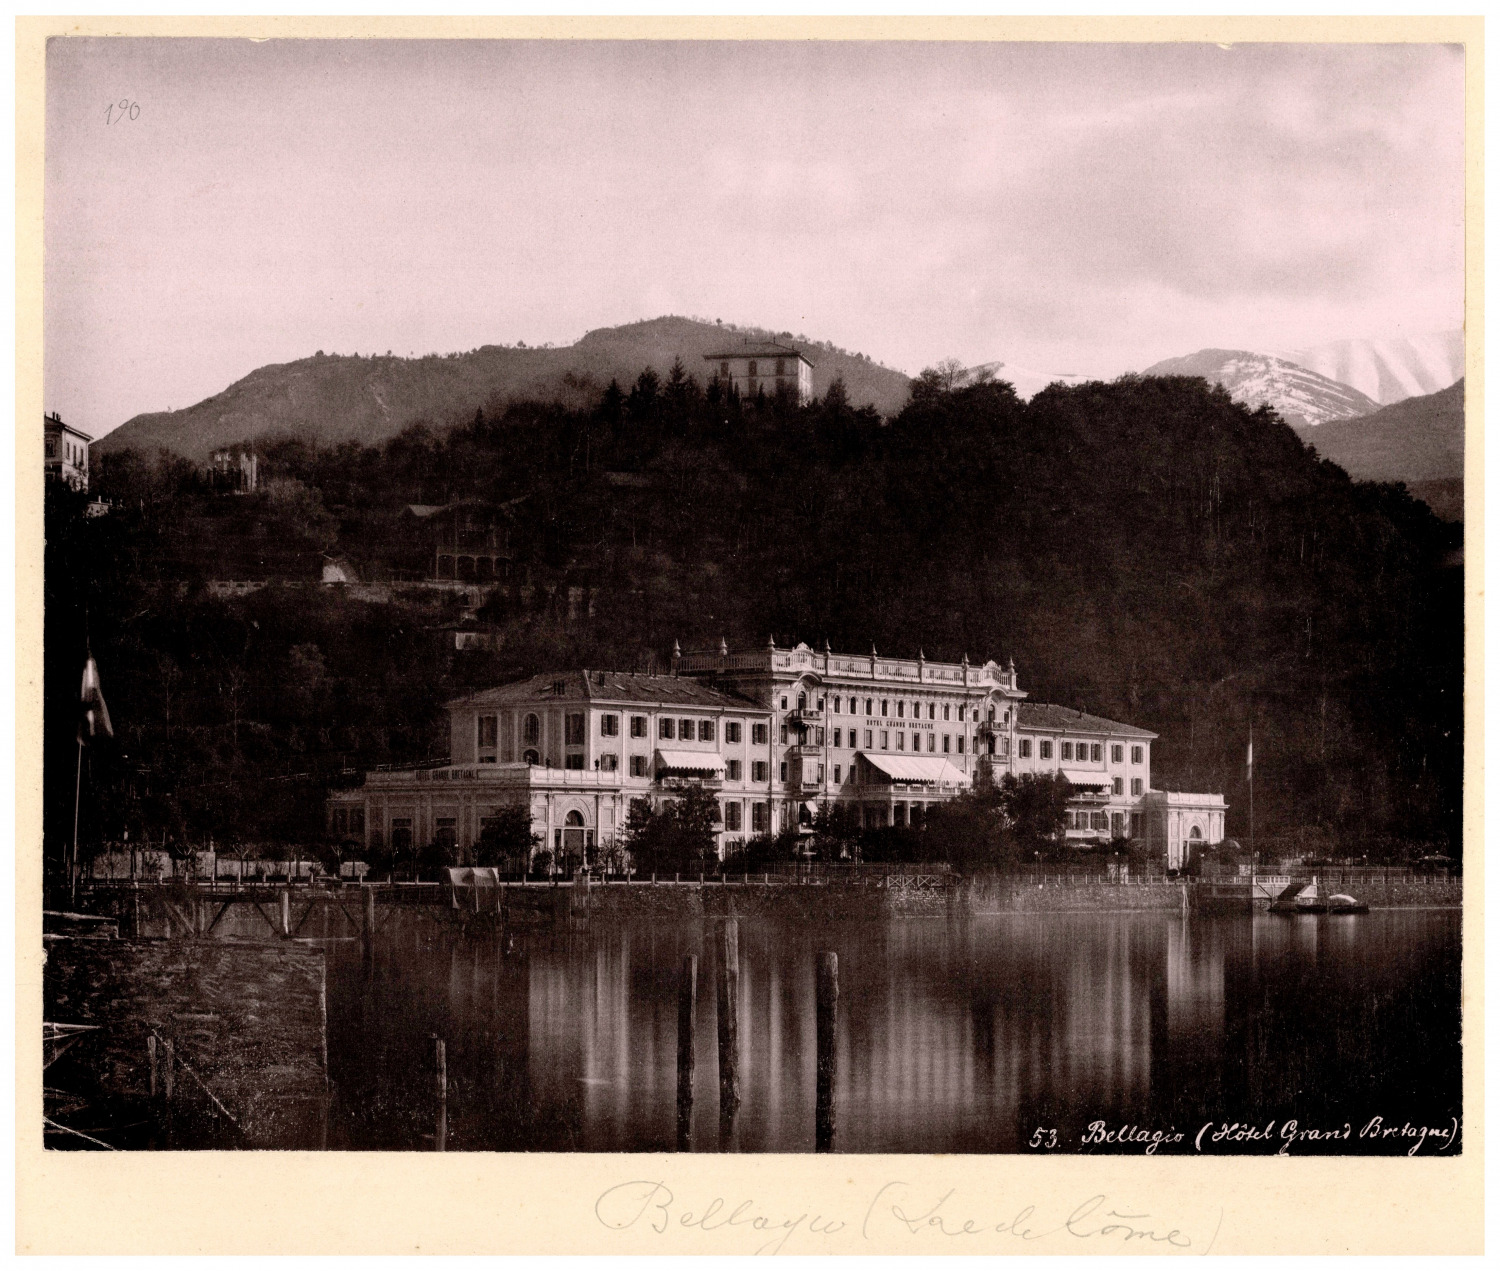 Italy, Bellagio, Lake Como Lombardy, Hotel Great Brittany Vintage print, 